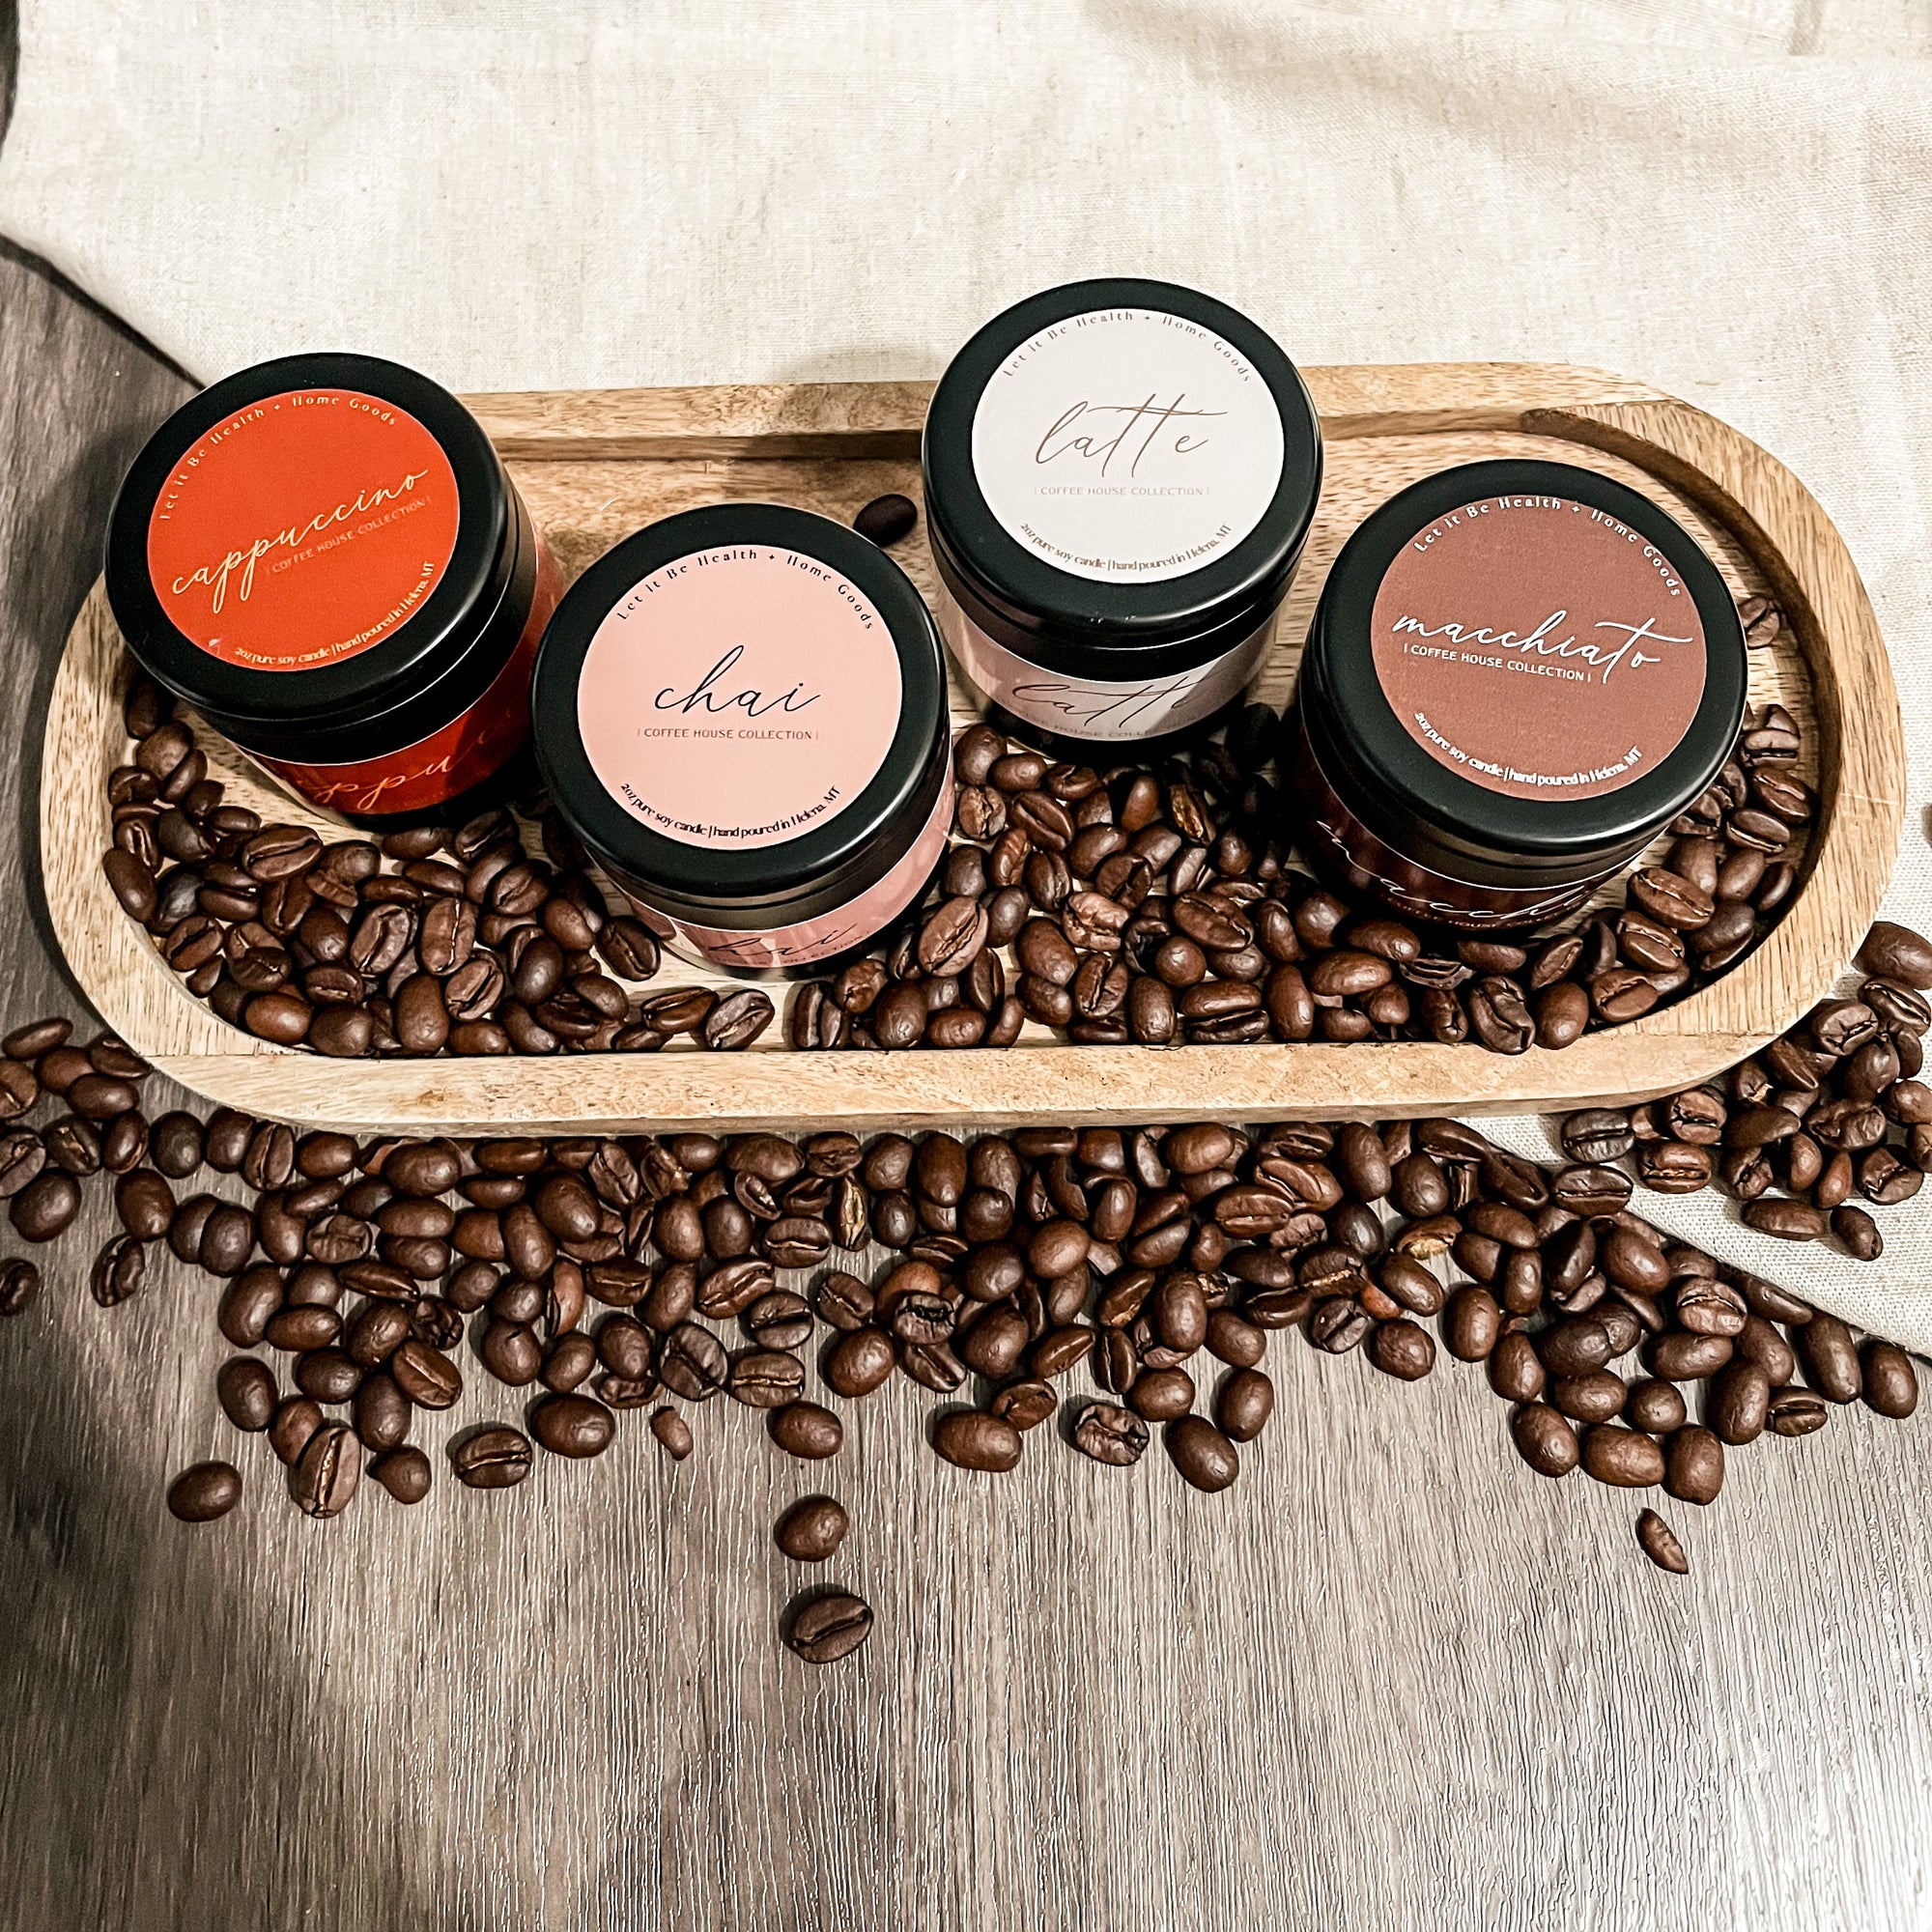 Coffee House Collection - 4pk